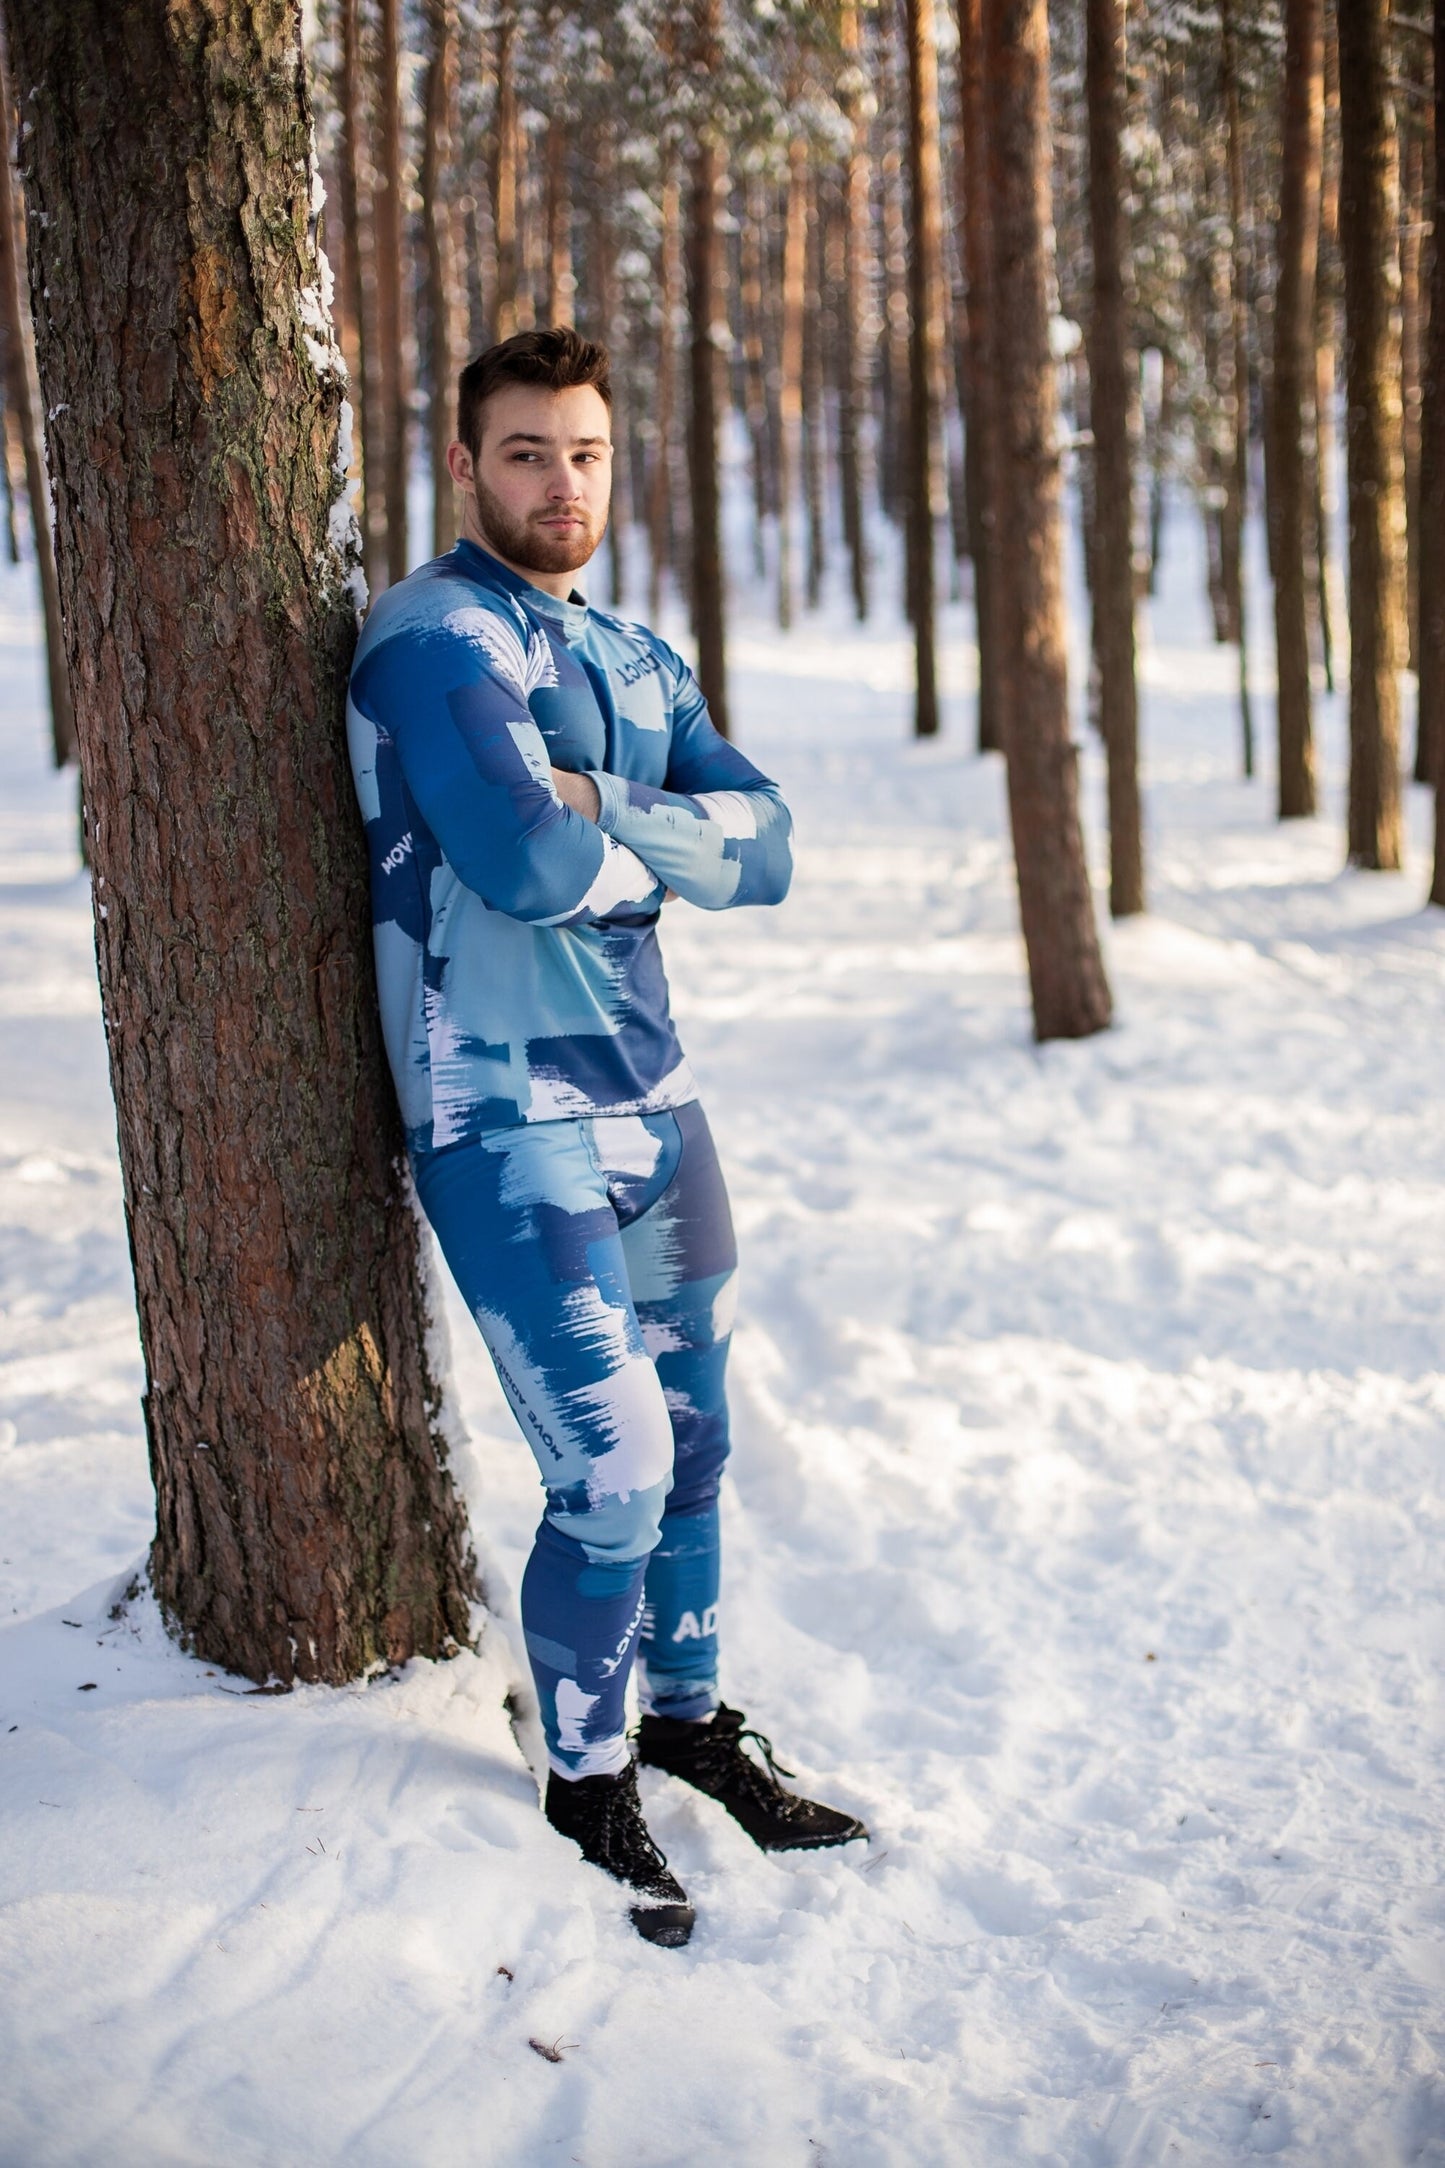 SET: Men's Gray Winter Ski Jumpsuit, Snowboard Clothes, Snowboard suit, Skiing Overall, Men's Mountain's clothes, Winter Thermal underwear